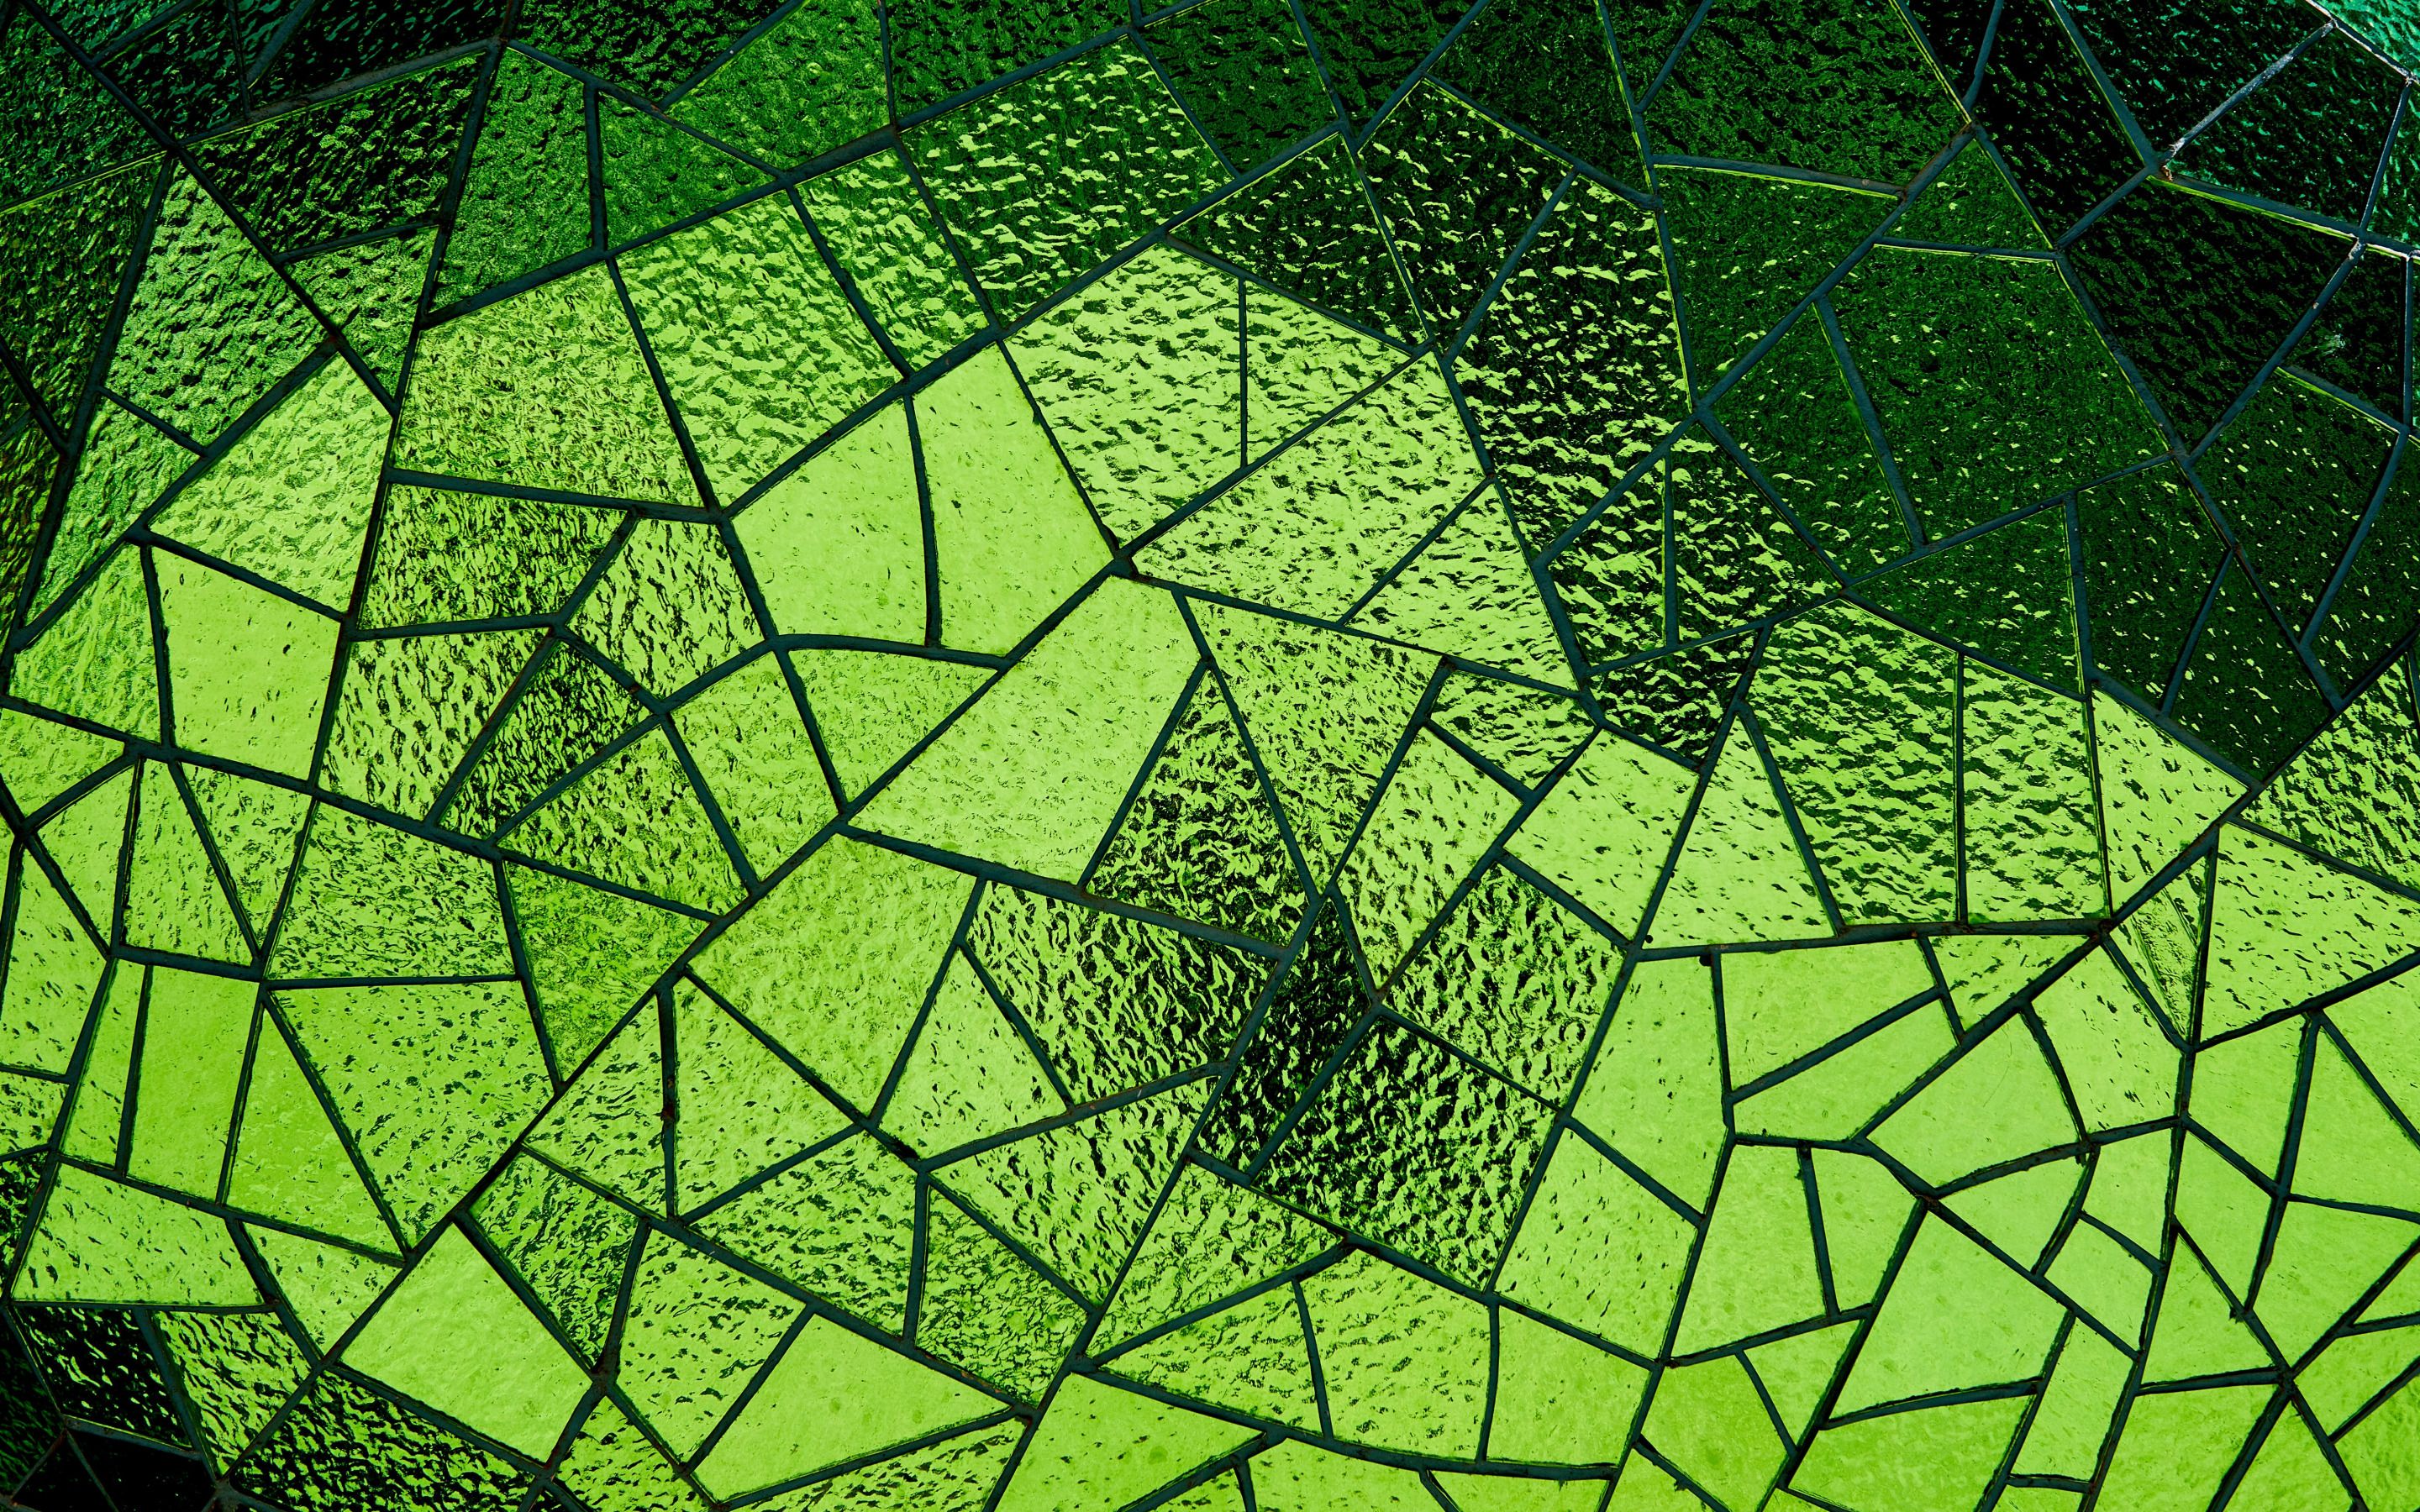 Download wallpaper green glass mosaic, green mosaic texture, glass texture, green glass background, mosaic background for desktop with resolution 2880x1800. High Quality HD picture wallpaper